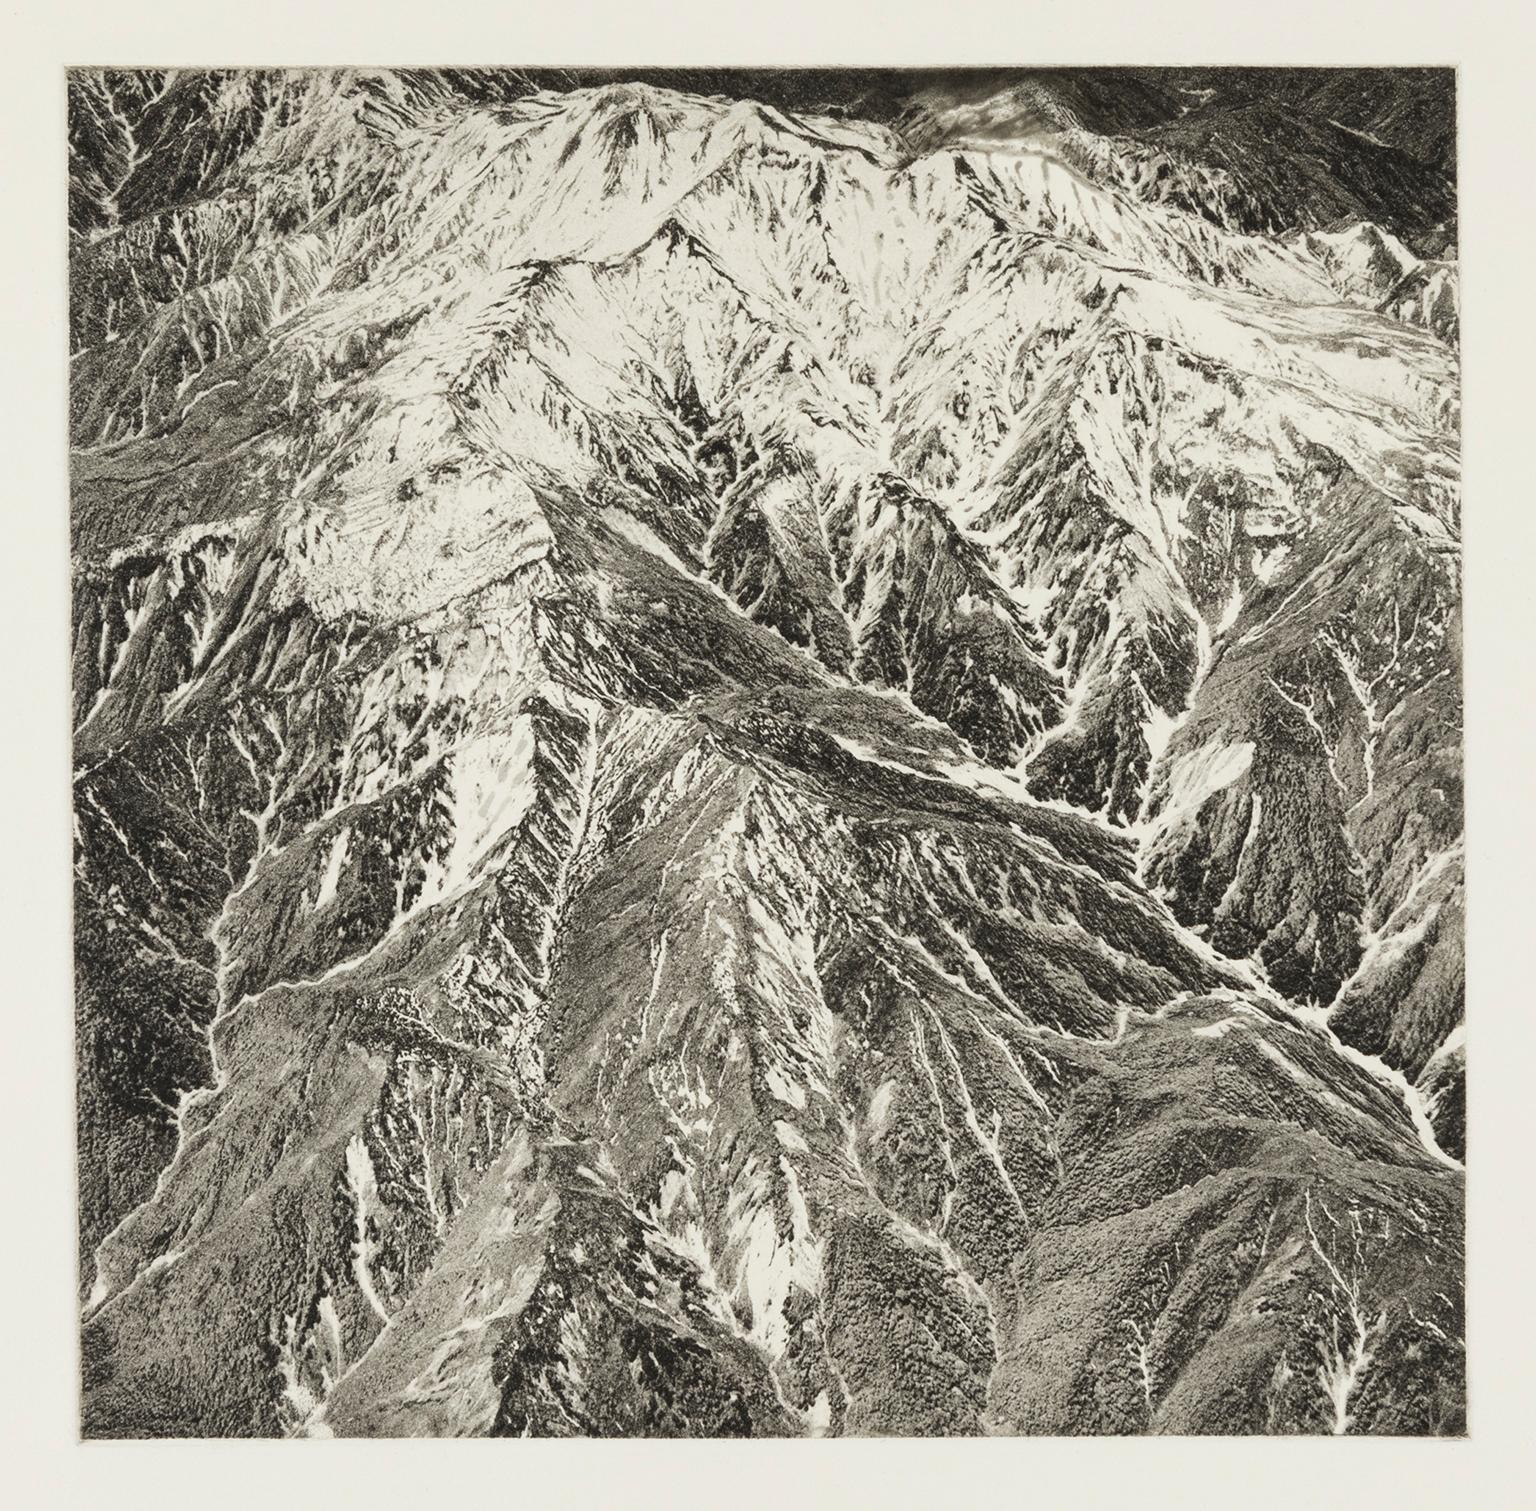 'Mount Haru, Japan' — from the series 'Axis Mundi', Contemporary - Print by Beth Ganz